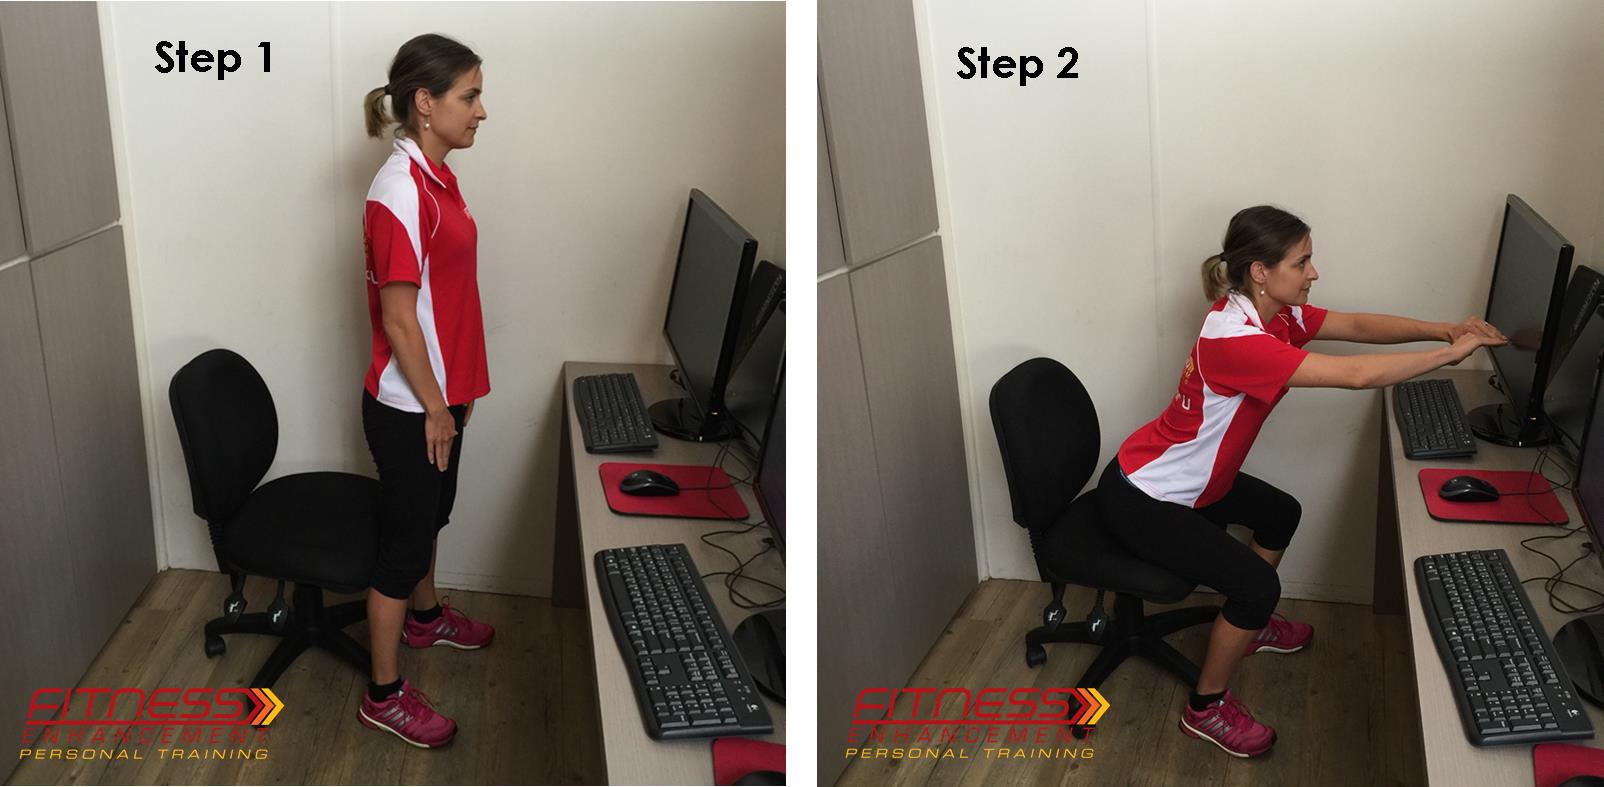 Desk stretches to ease aches and pains